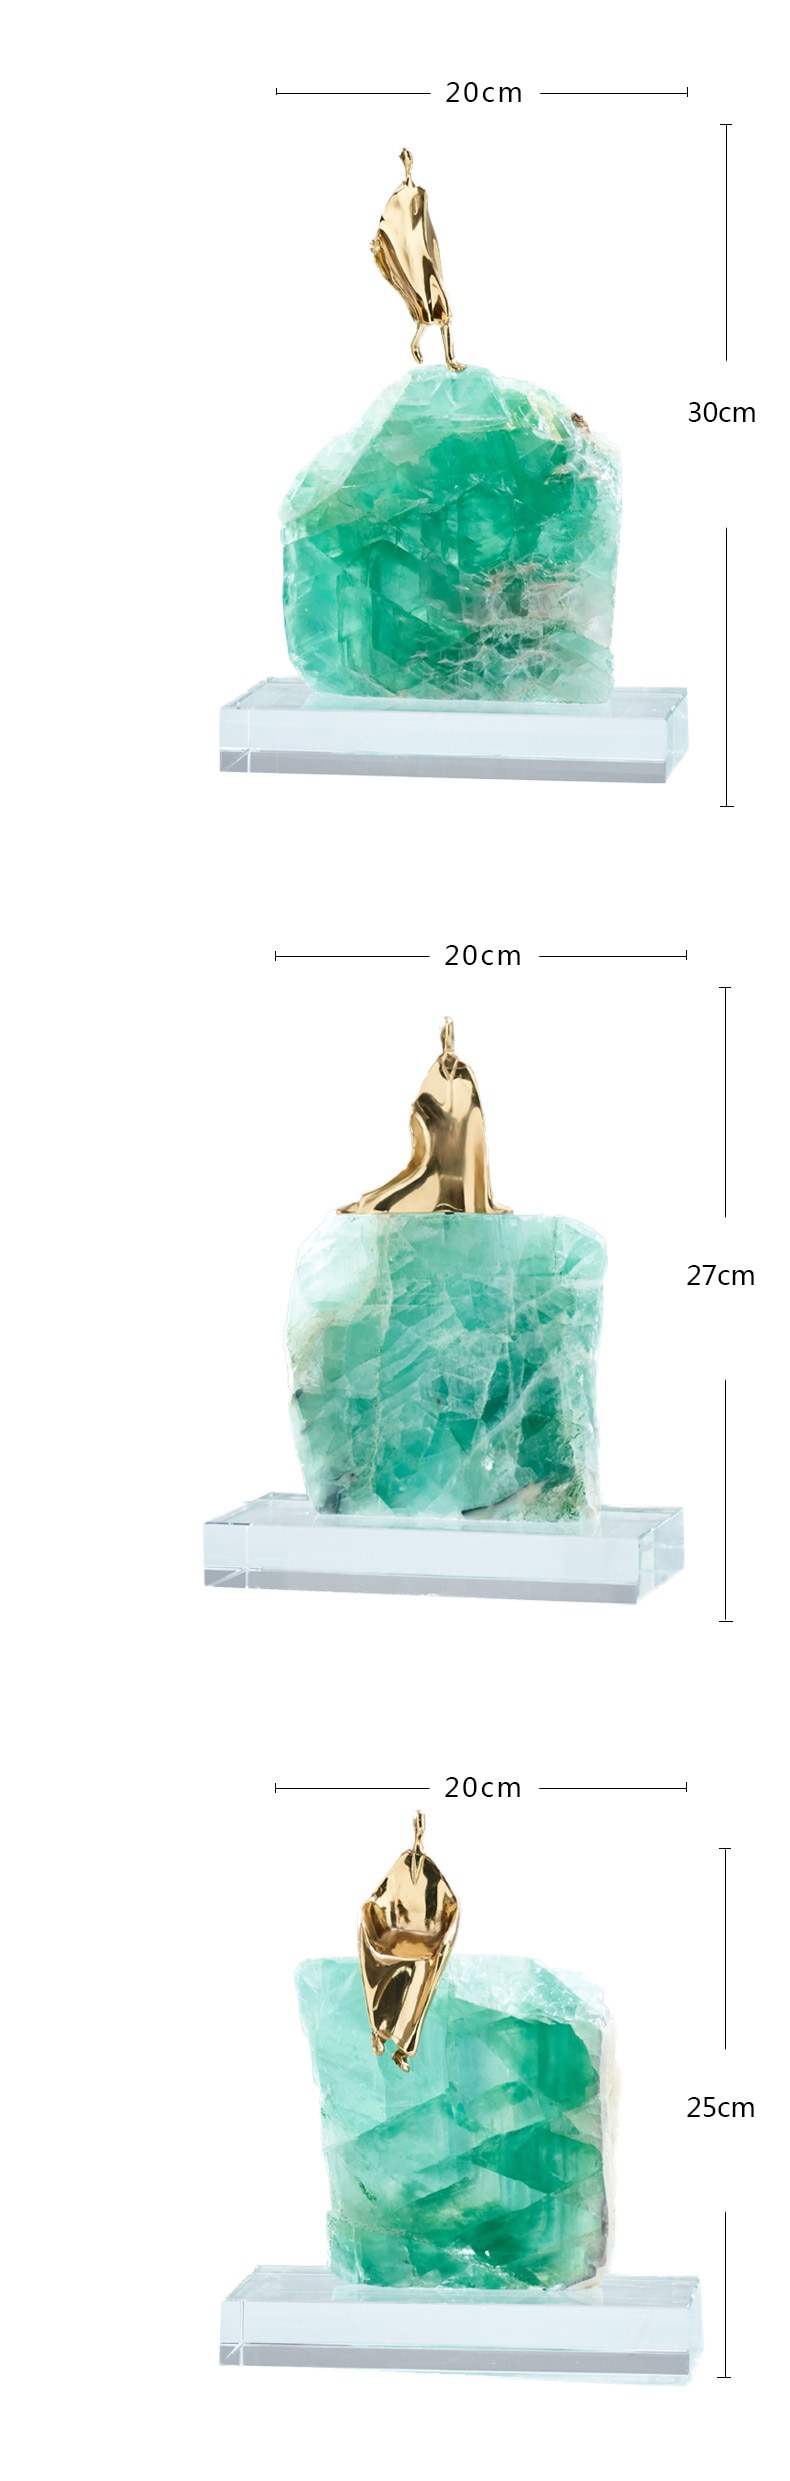 Modern Abstract Brass Figure Running On Natural Green Spar Statue Home Crafts Room Decor Objects K9 Rectangle Crystal Sculpture